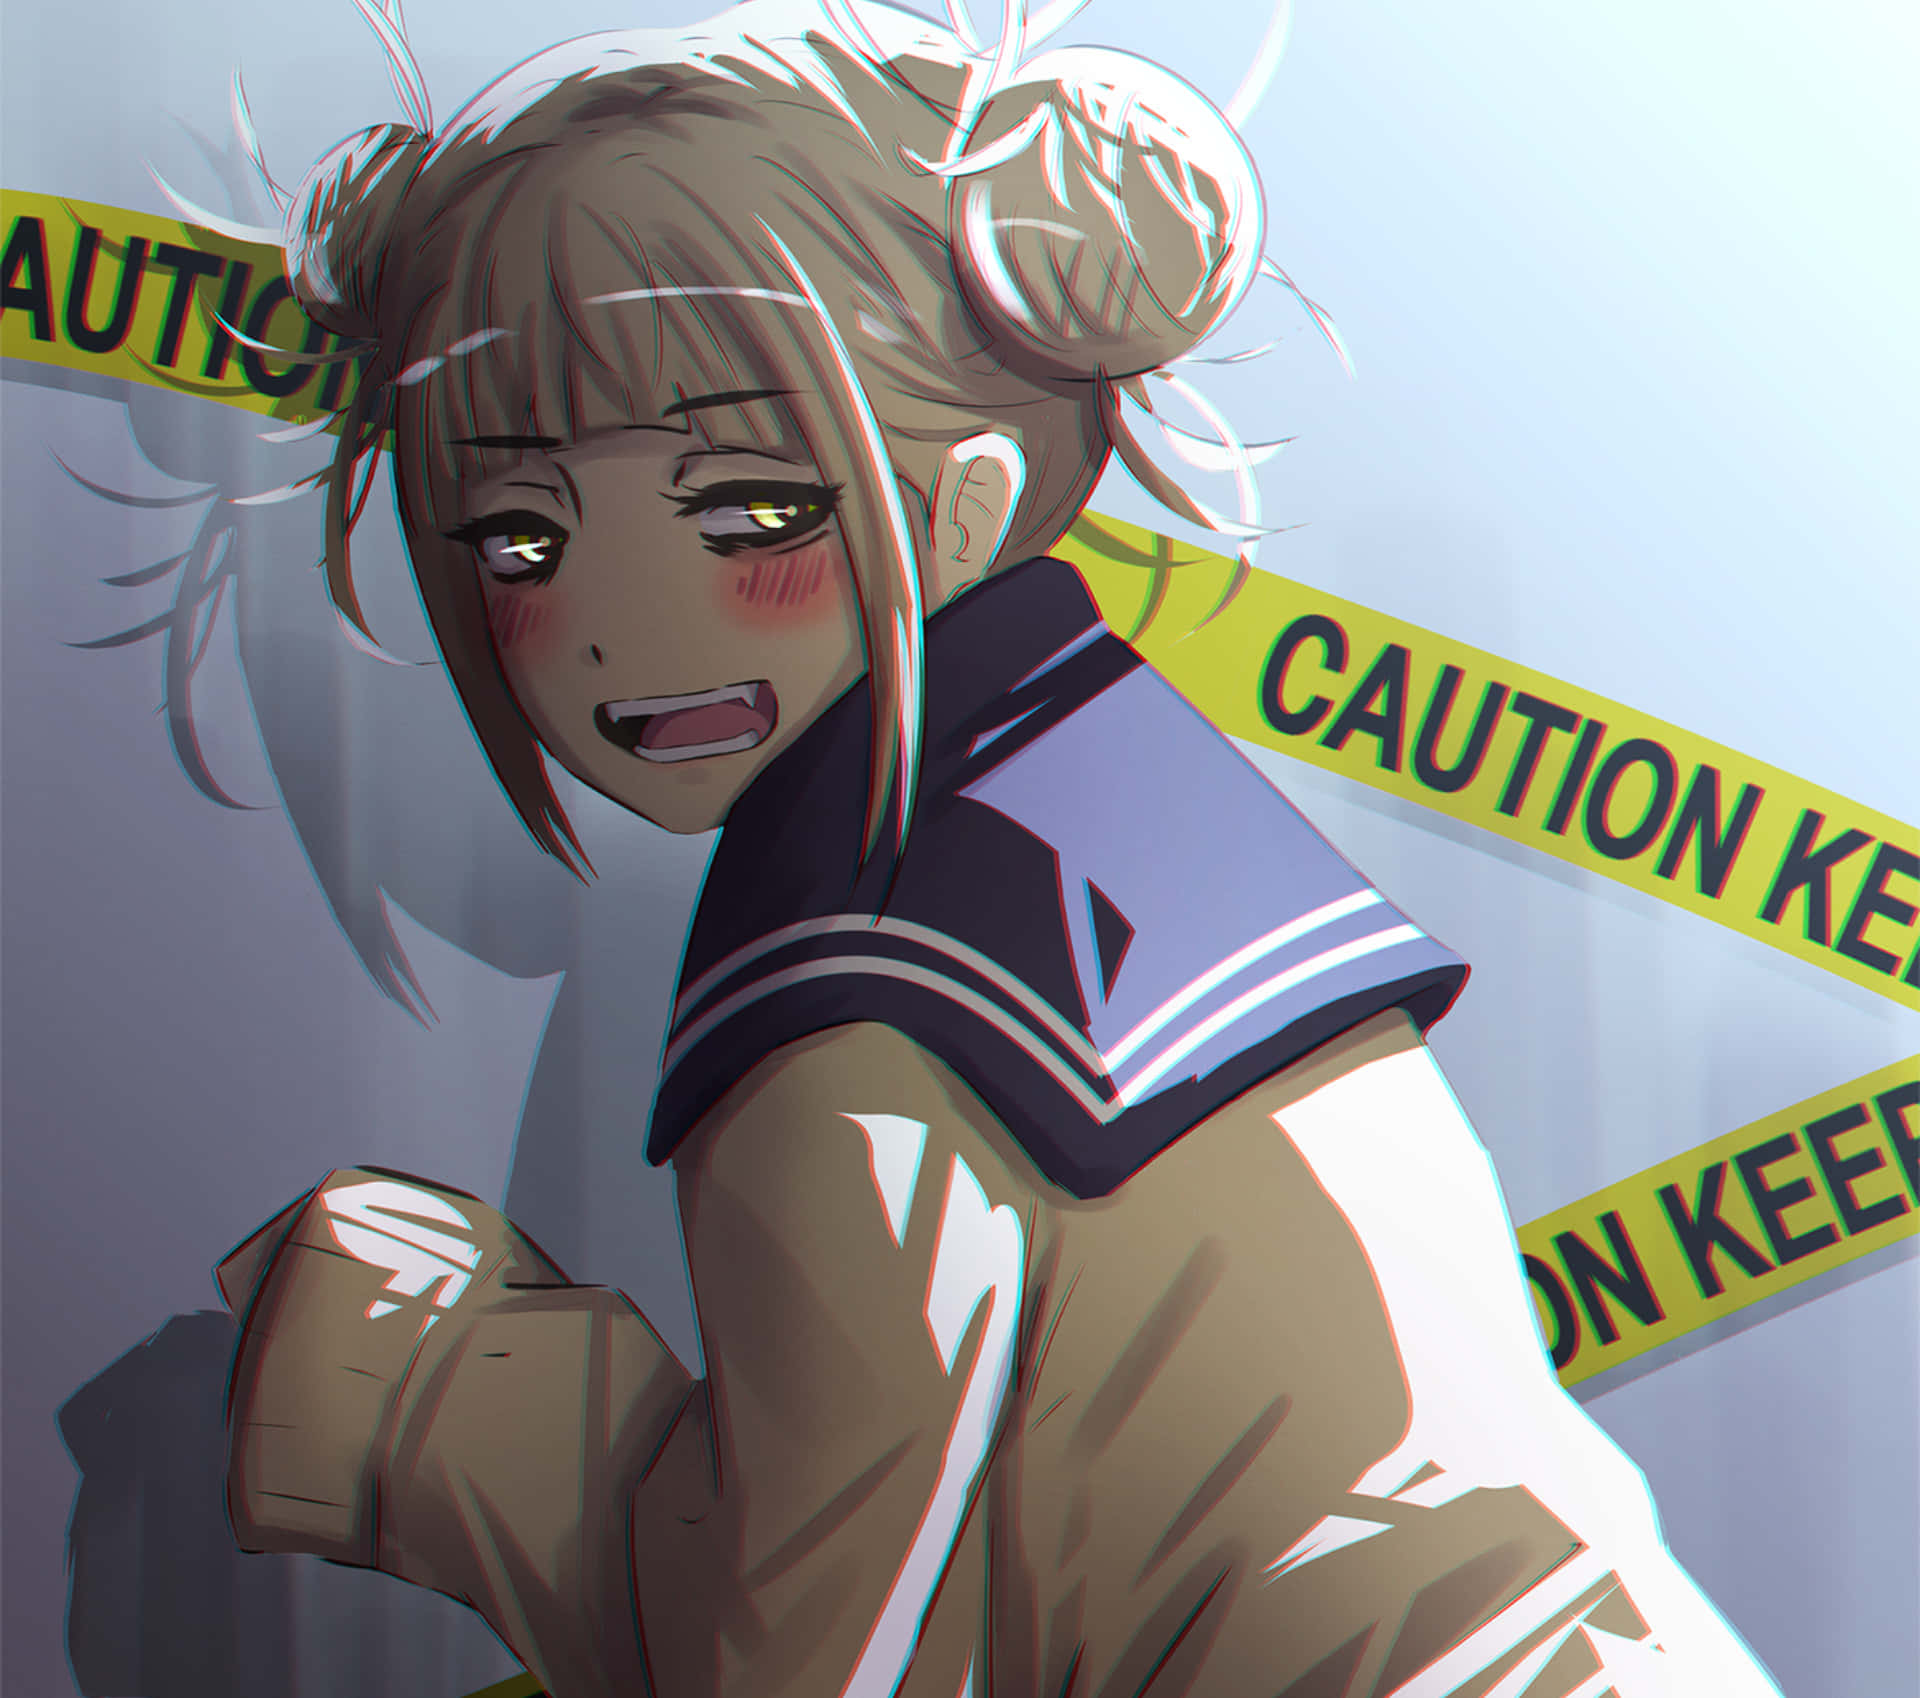 Sneakyintruding Himiko Toga Aesthetic In Italian Can Be Translated As 